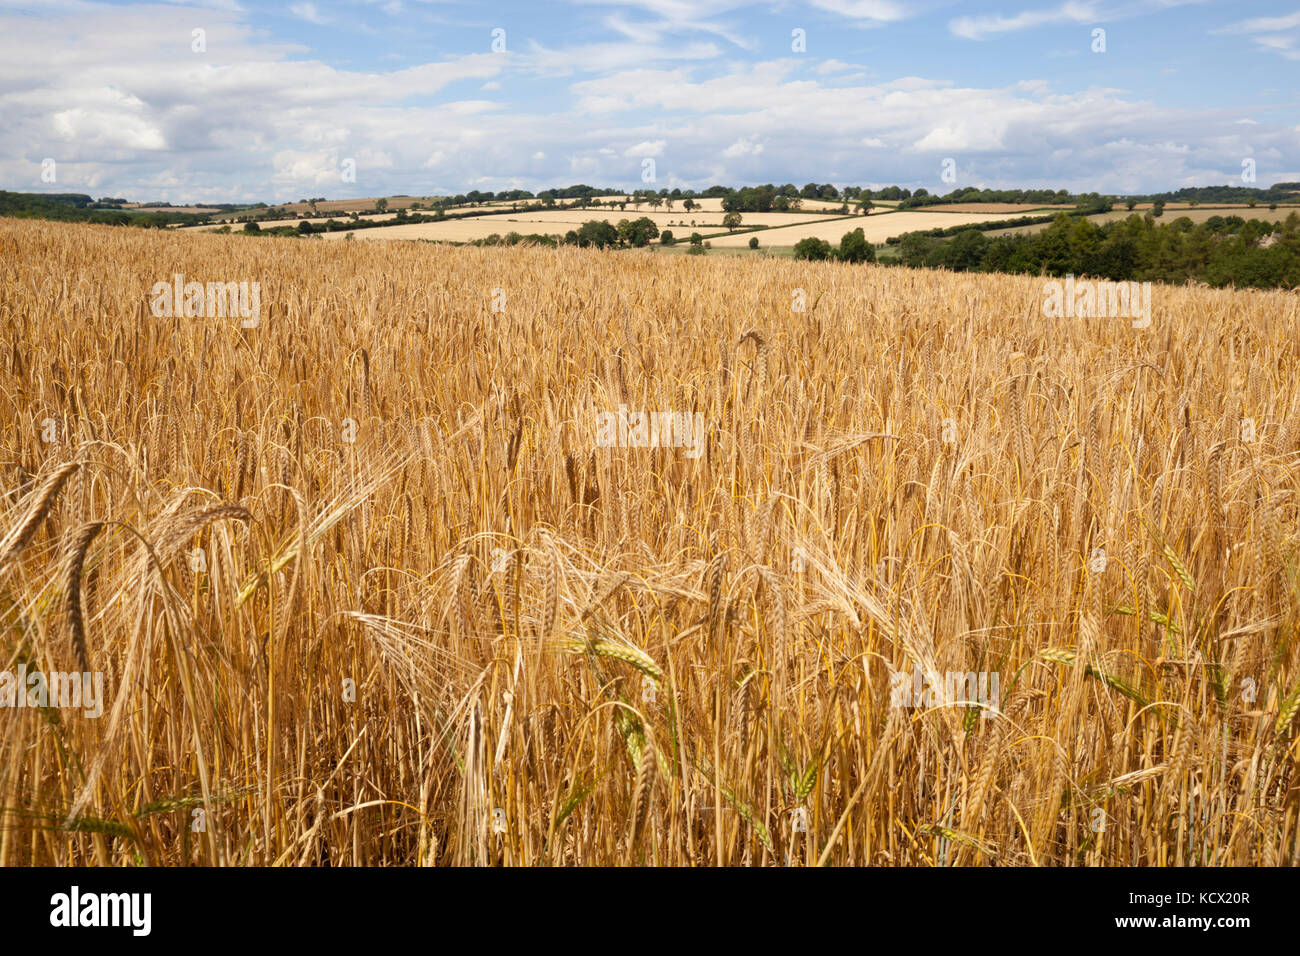 Ripe Barley in field, Guiting Power, Cotswolds, Gloucestershire, England, United Kingdom, Europe Stock Photo